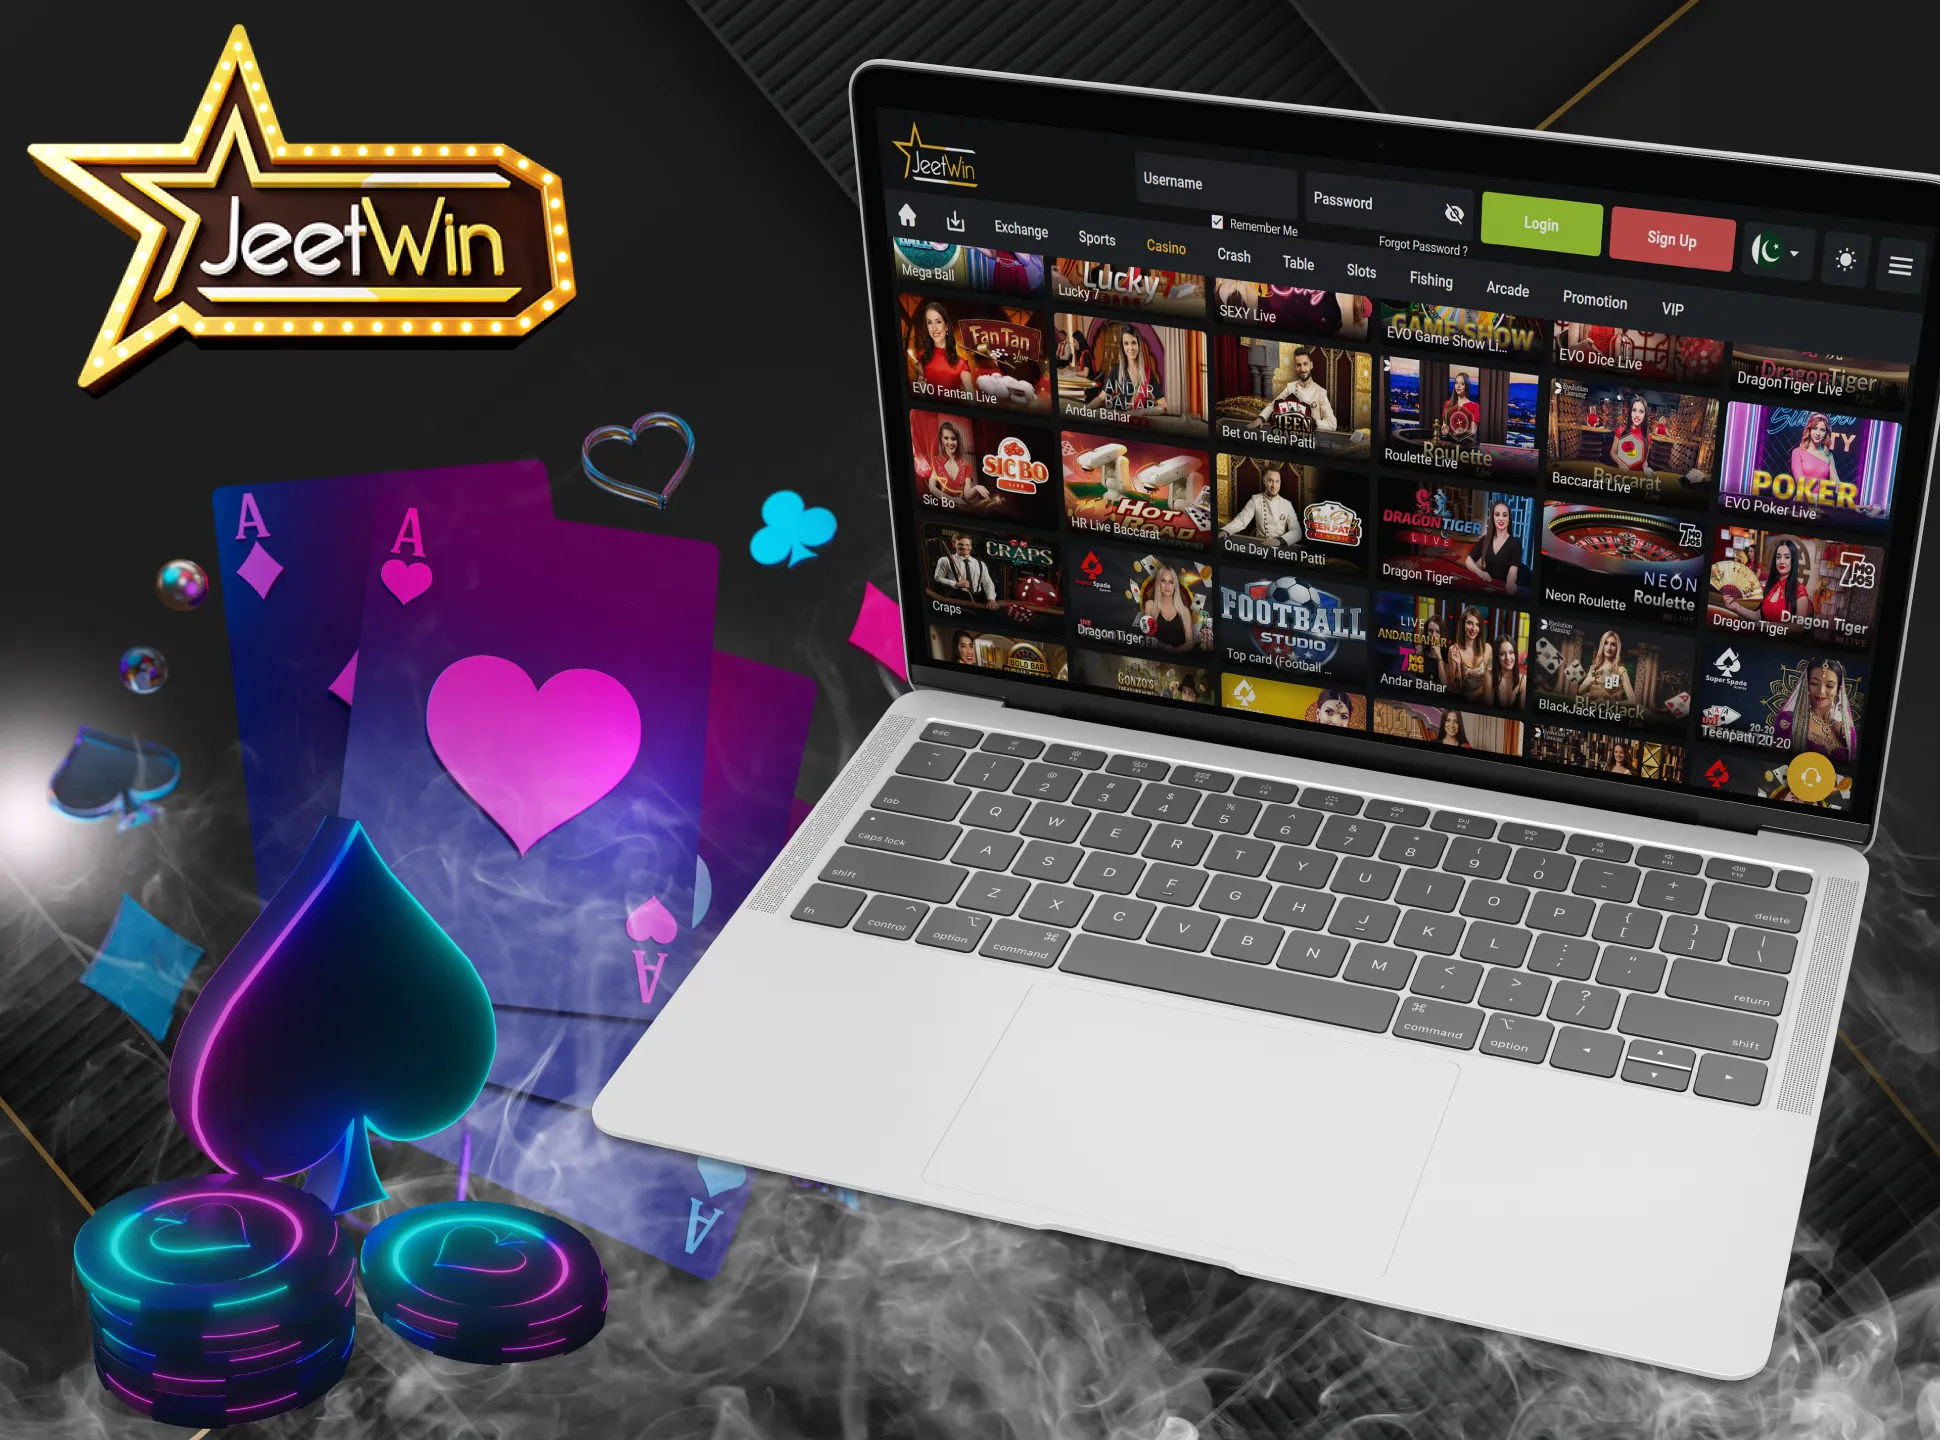 Discover the key distinguishing features of the Live Casino section of the JeetWin website.